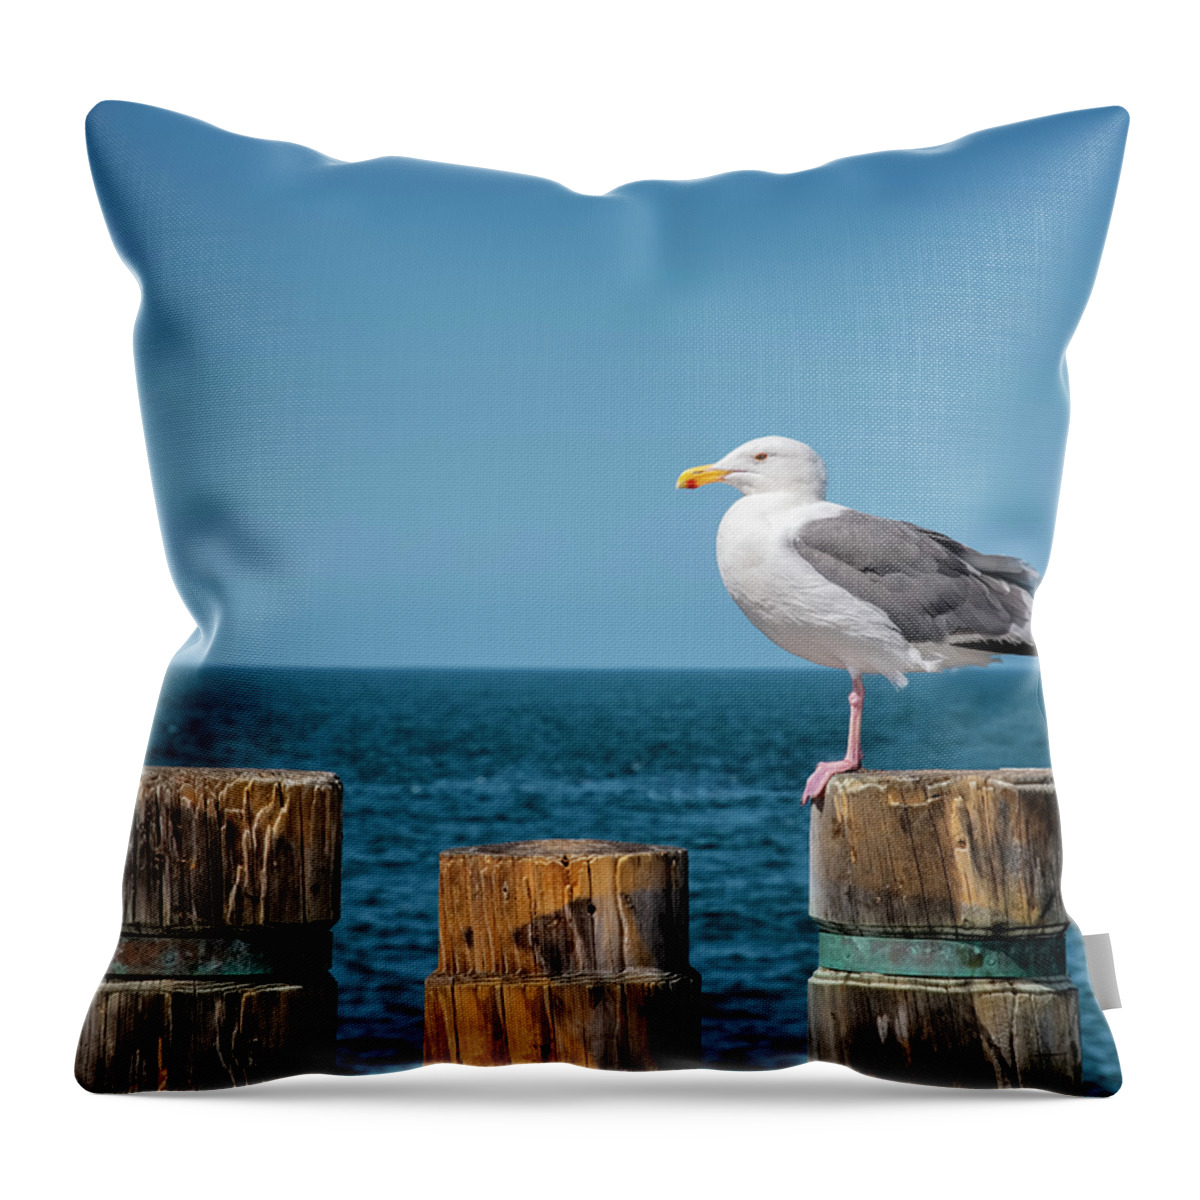 Mew Throw Pillow featuring the photograph Mew by Steven Michael